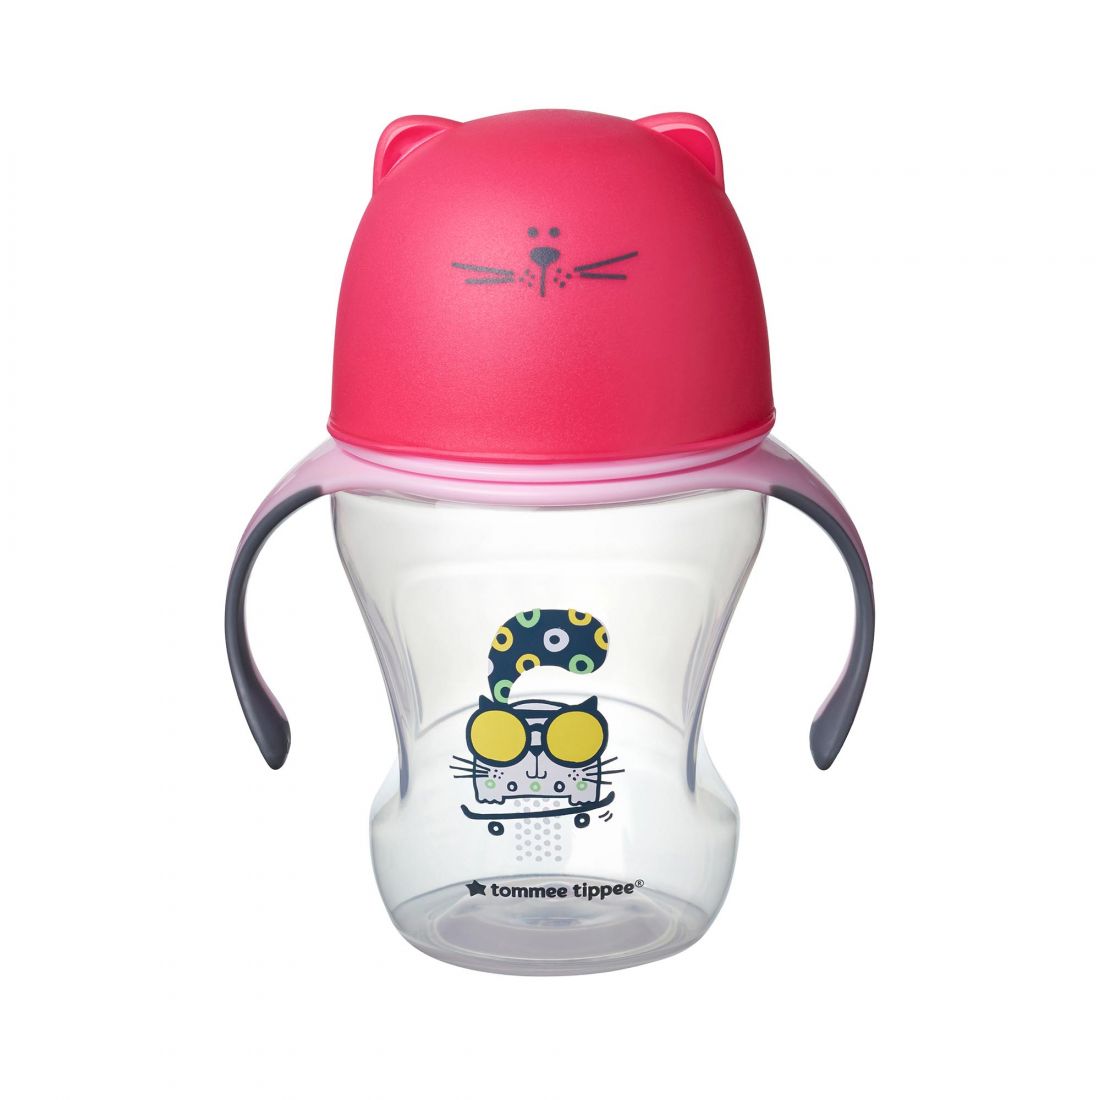 Tommee Tippee Kids Training Cup with Soft Sippee and Handles 230ml 6m+ Pink